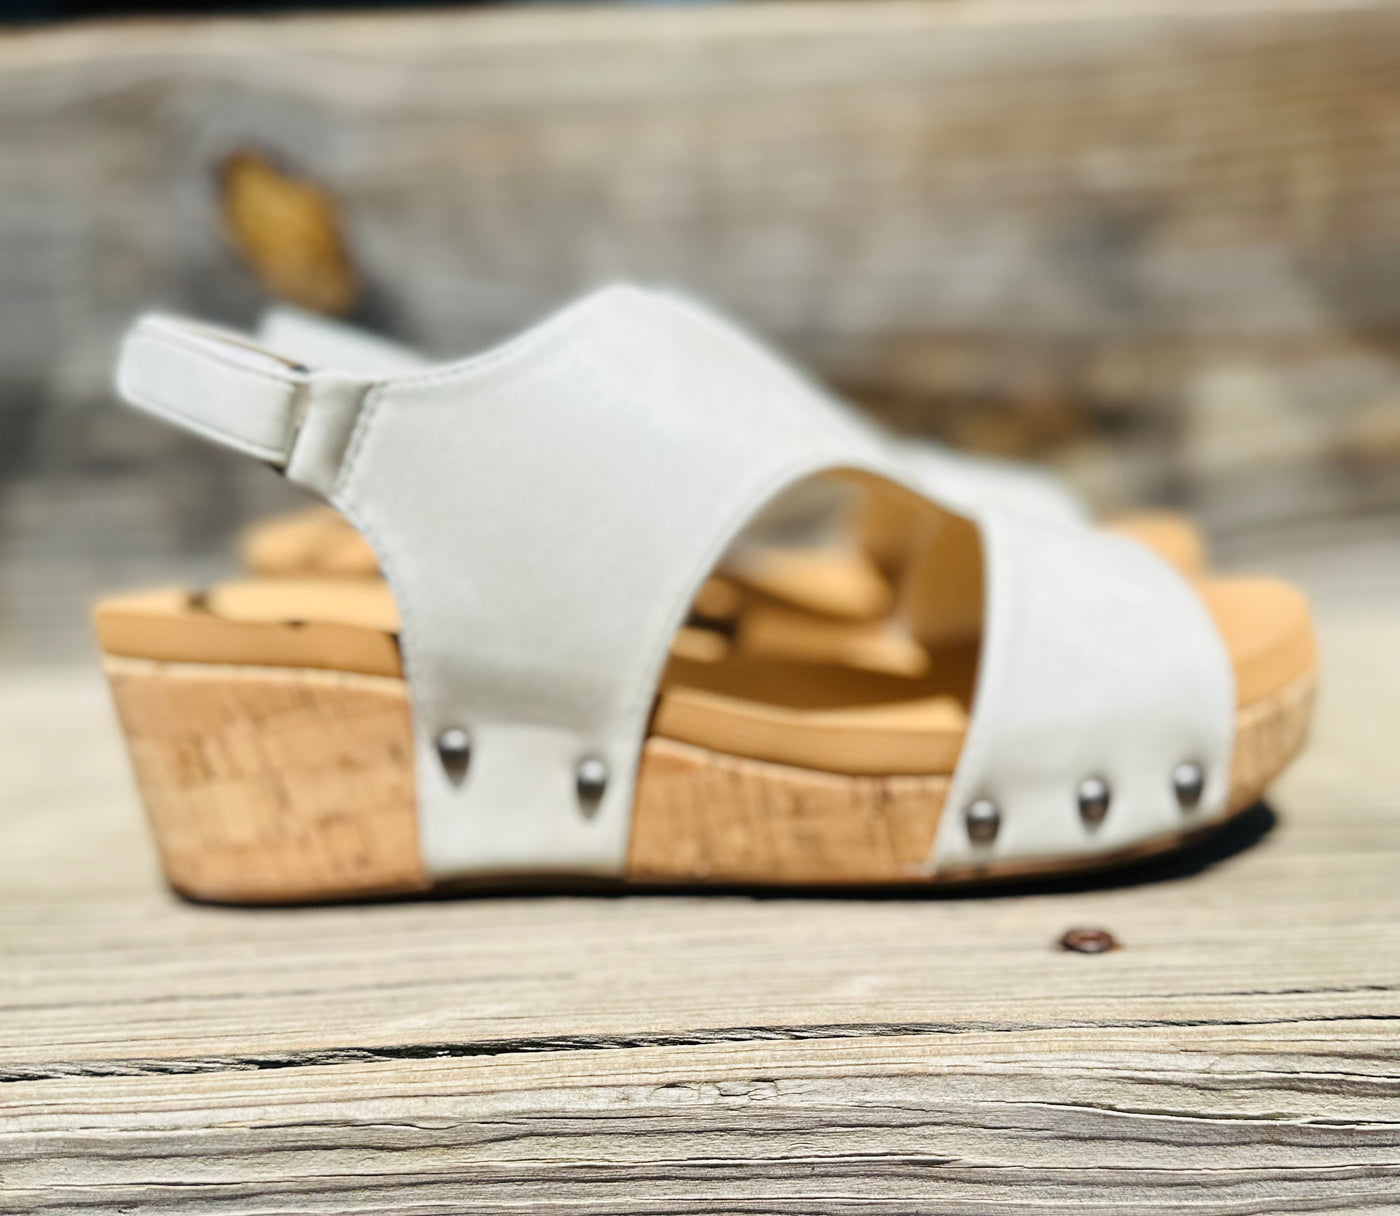 "Refreshing" Wedge in White by Corky's